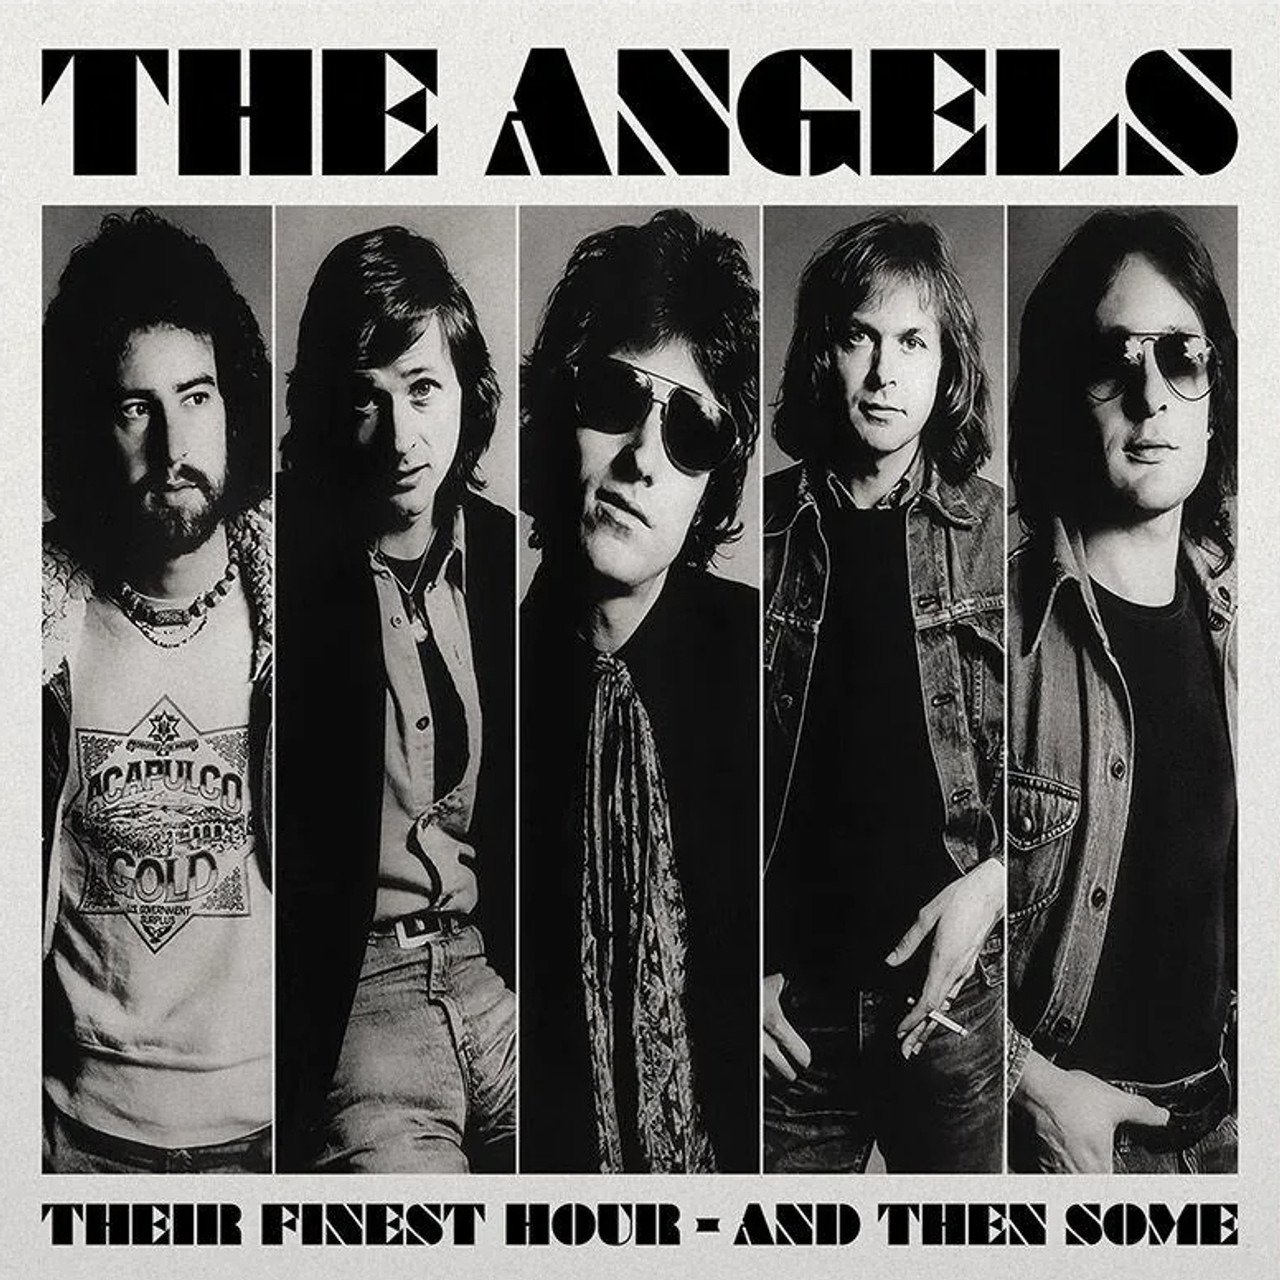 CD Shop - ANGELS, THE THEIR FINEST HOUR - AND THEN SOME (EXPANDED EDITION)